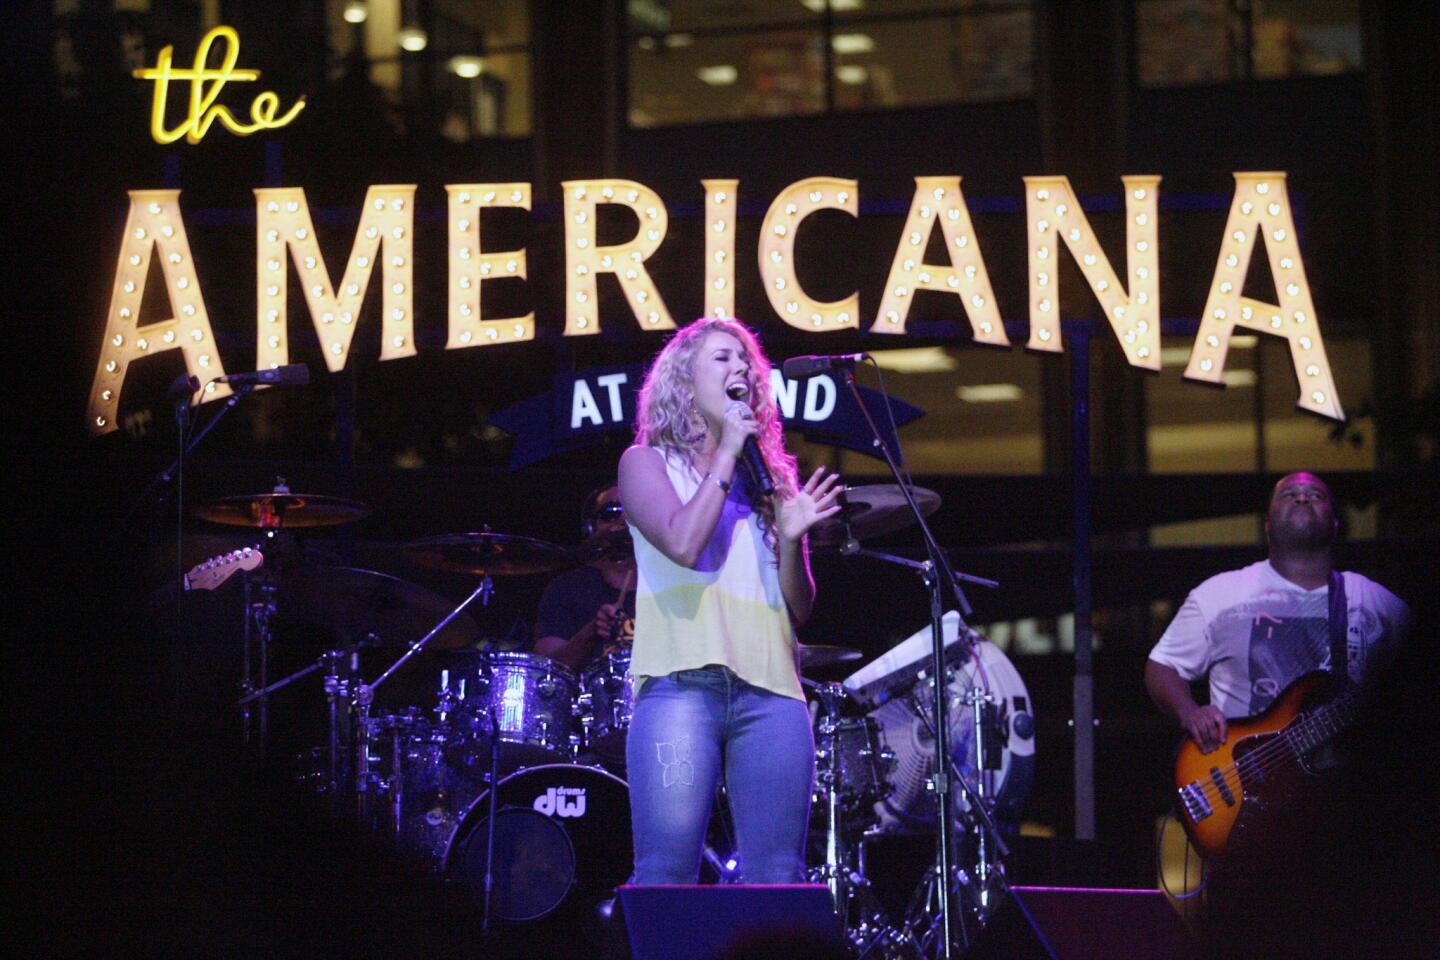 American Idol Haley Reinhart performs at the Americana in Glendale on Thursday, August 23, 2012.